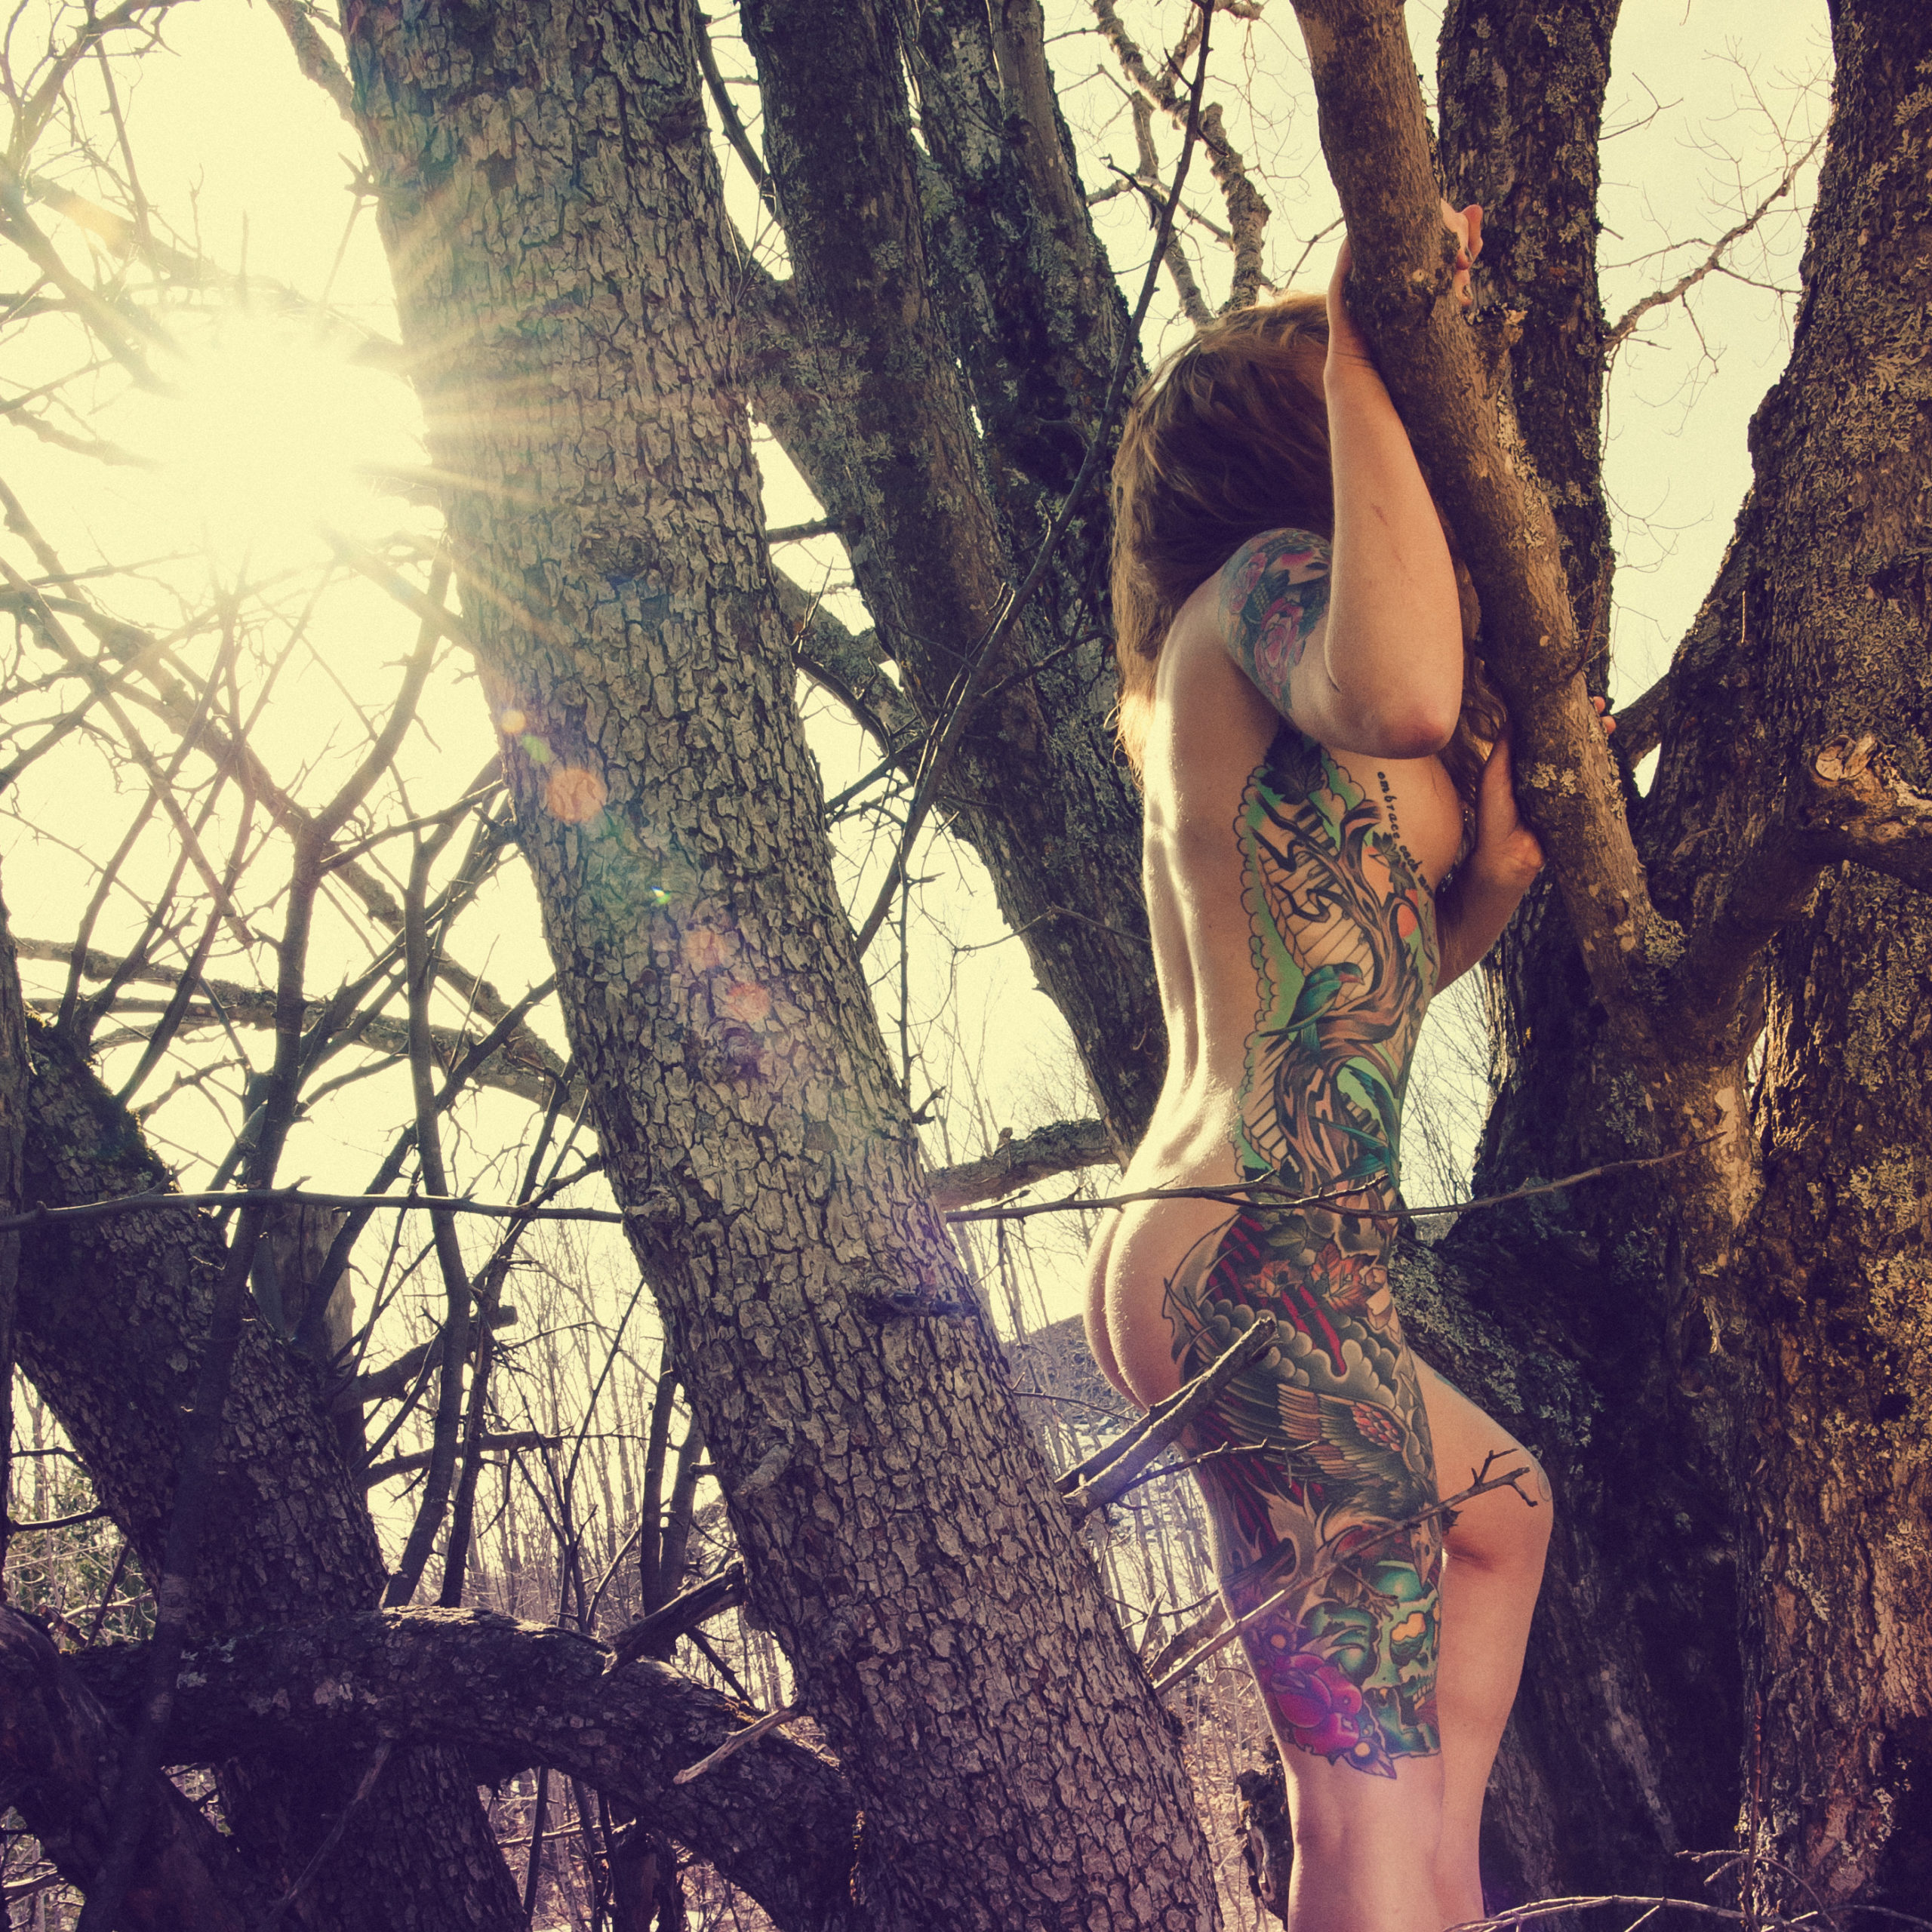 Tatted, naked woman in tree